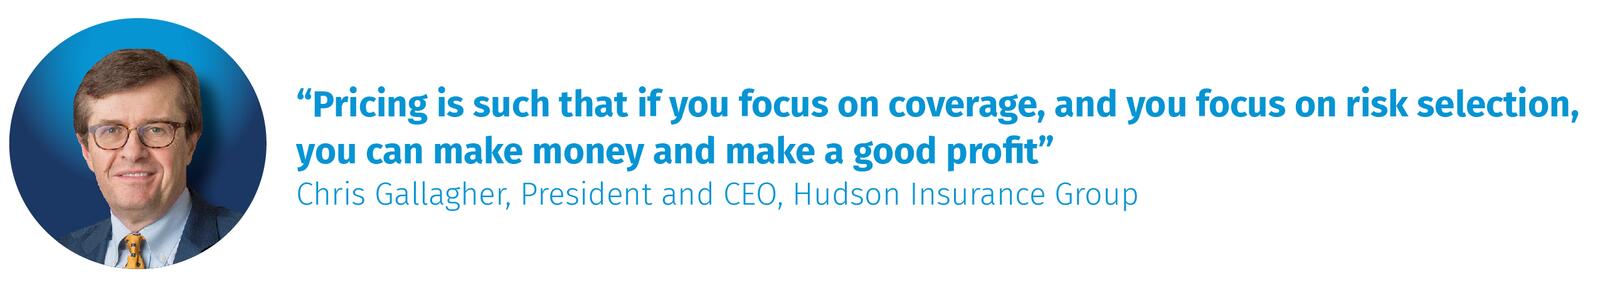 Chris Gallagher, President and CEO, Hudson Insurance Group